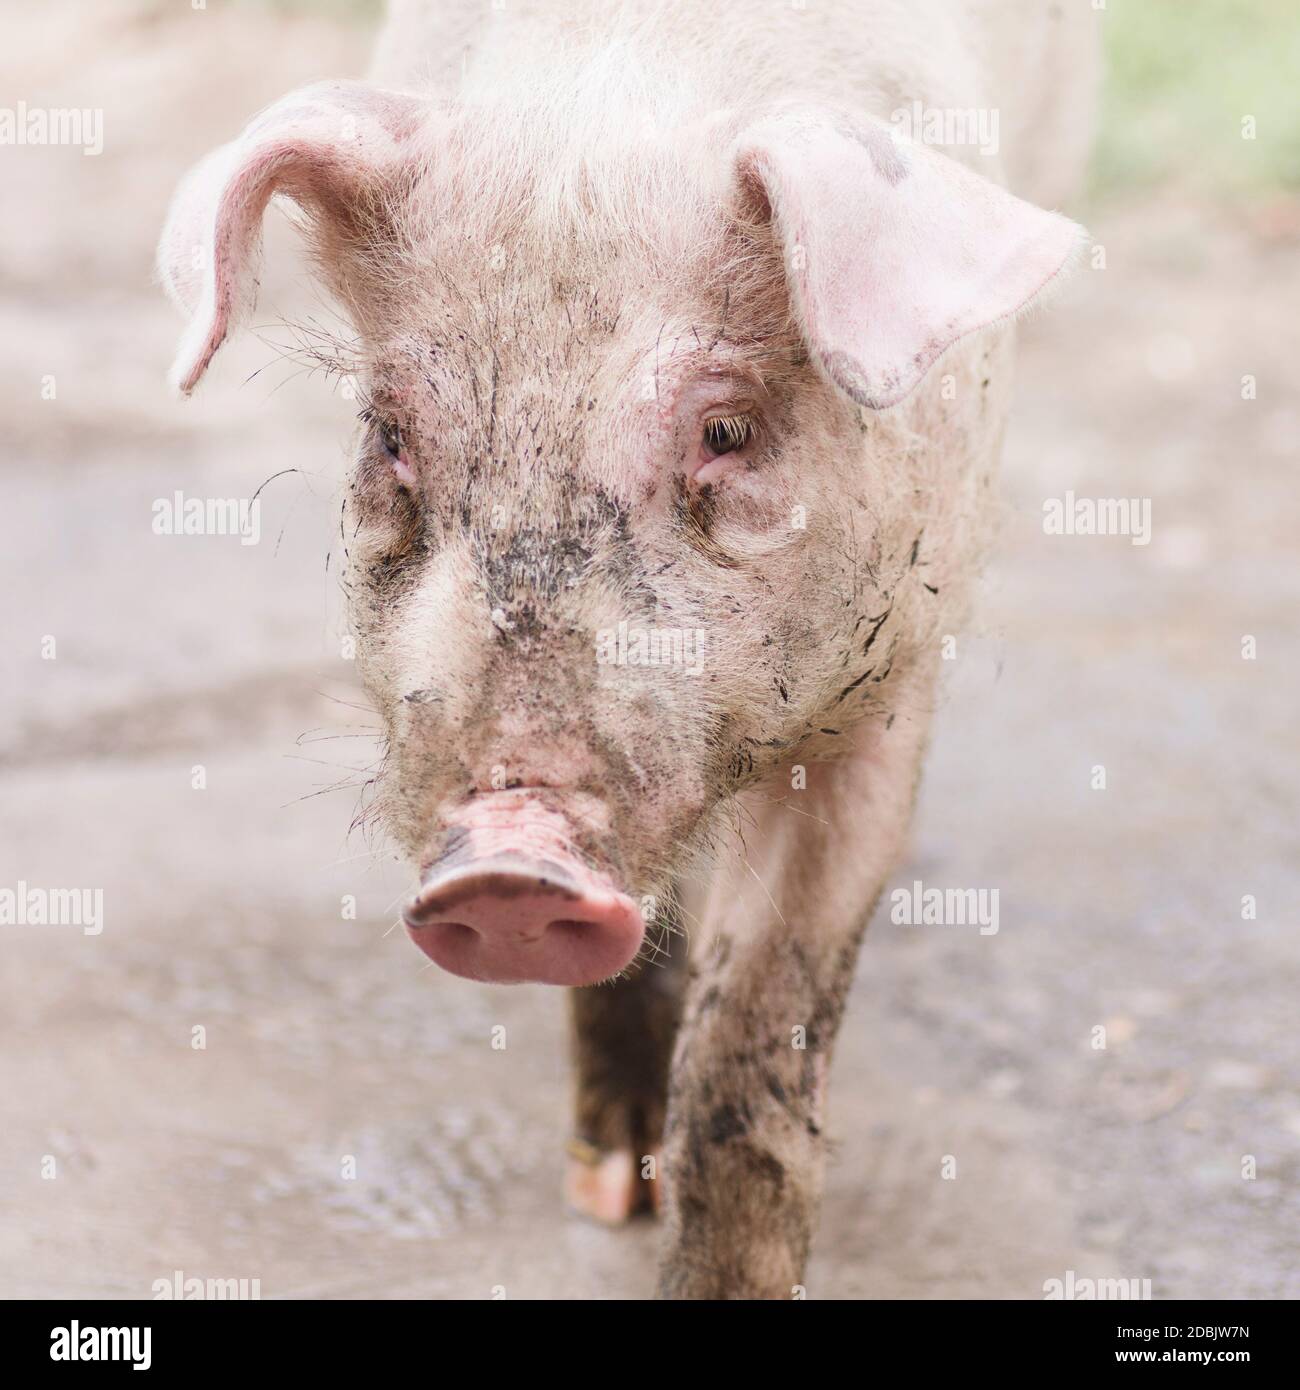 The dirty young pig is walking, animal portrait, pig breeding and agriculture concept. Stock Photo